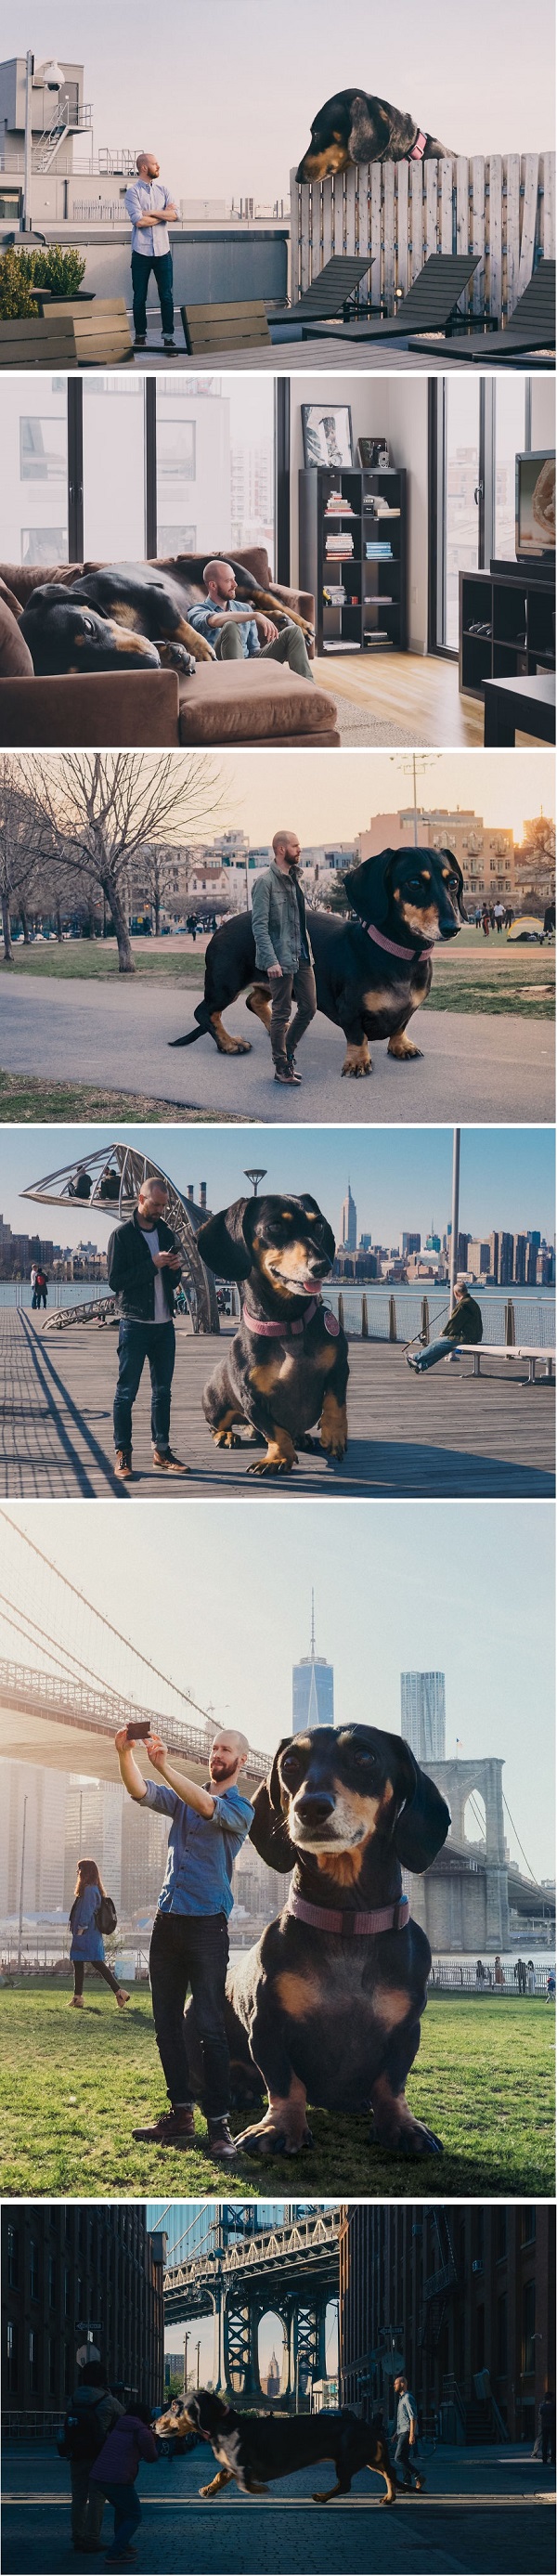 Dog owner photoshops his dog into a giant